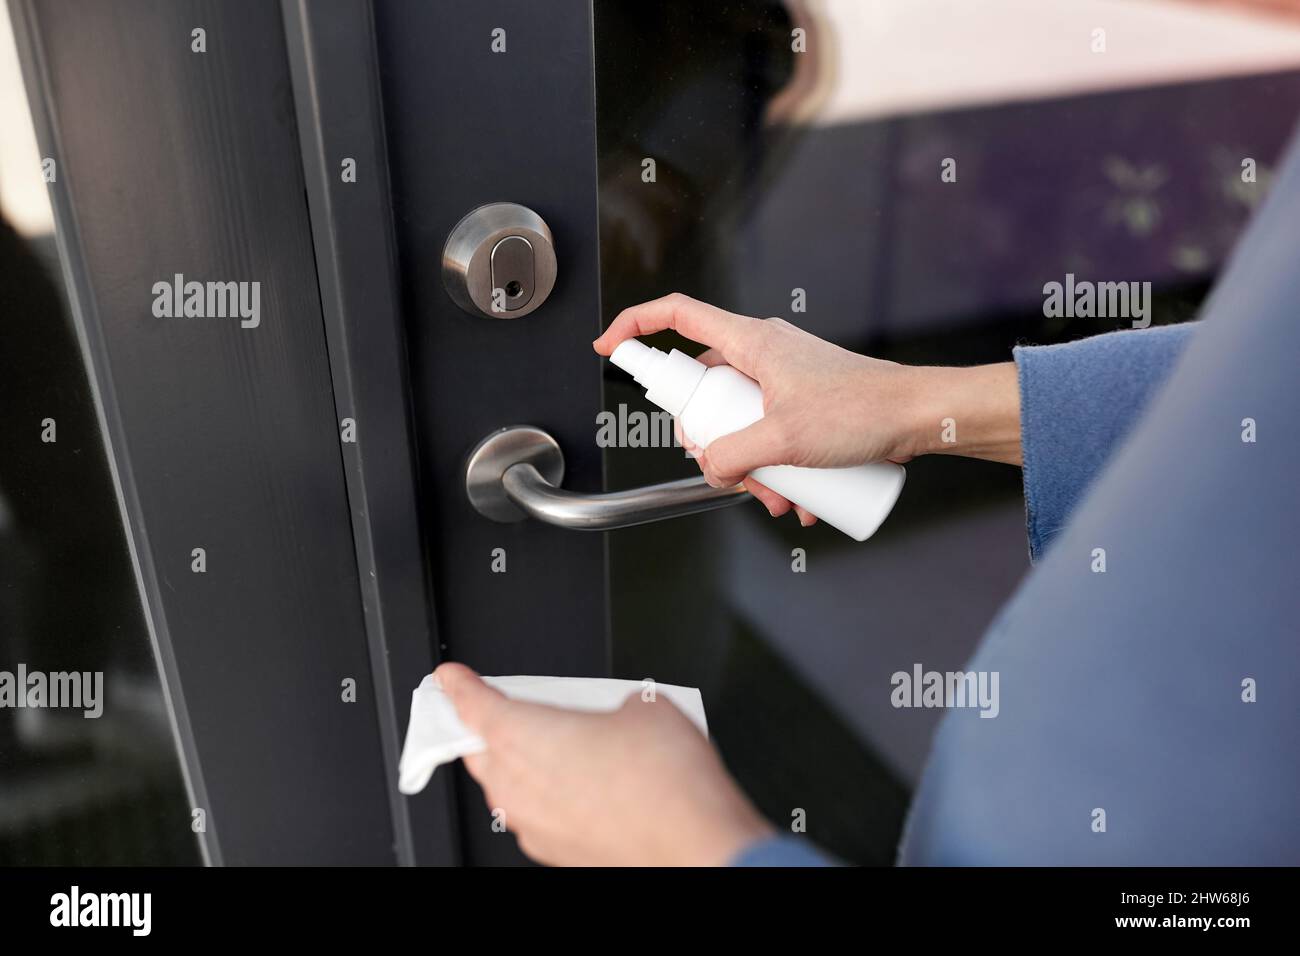 hand cleaning door handle with disinfectant spray Stock Photo